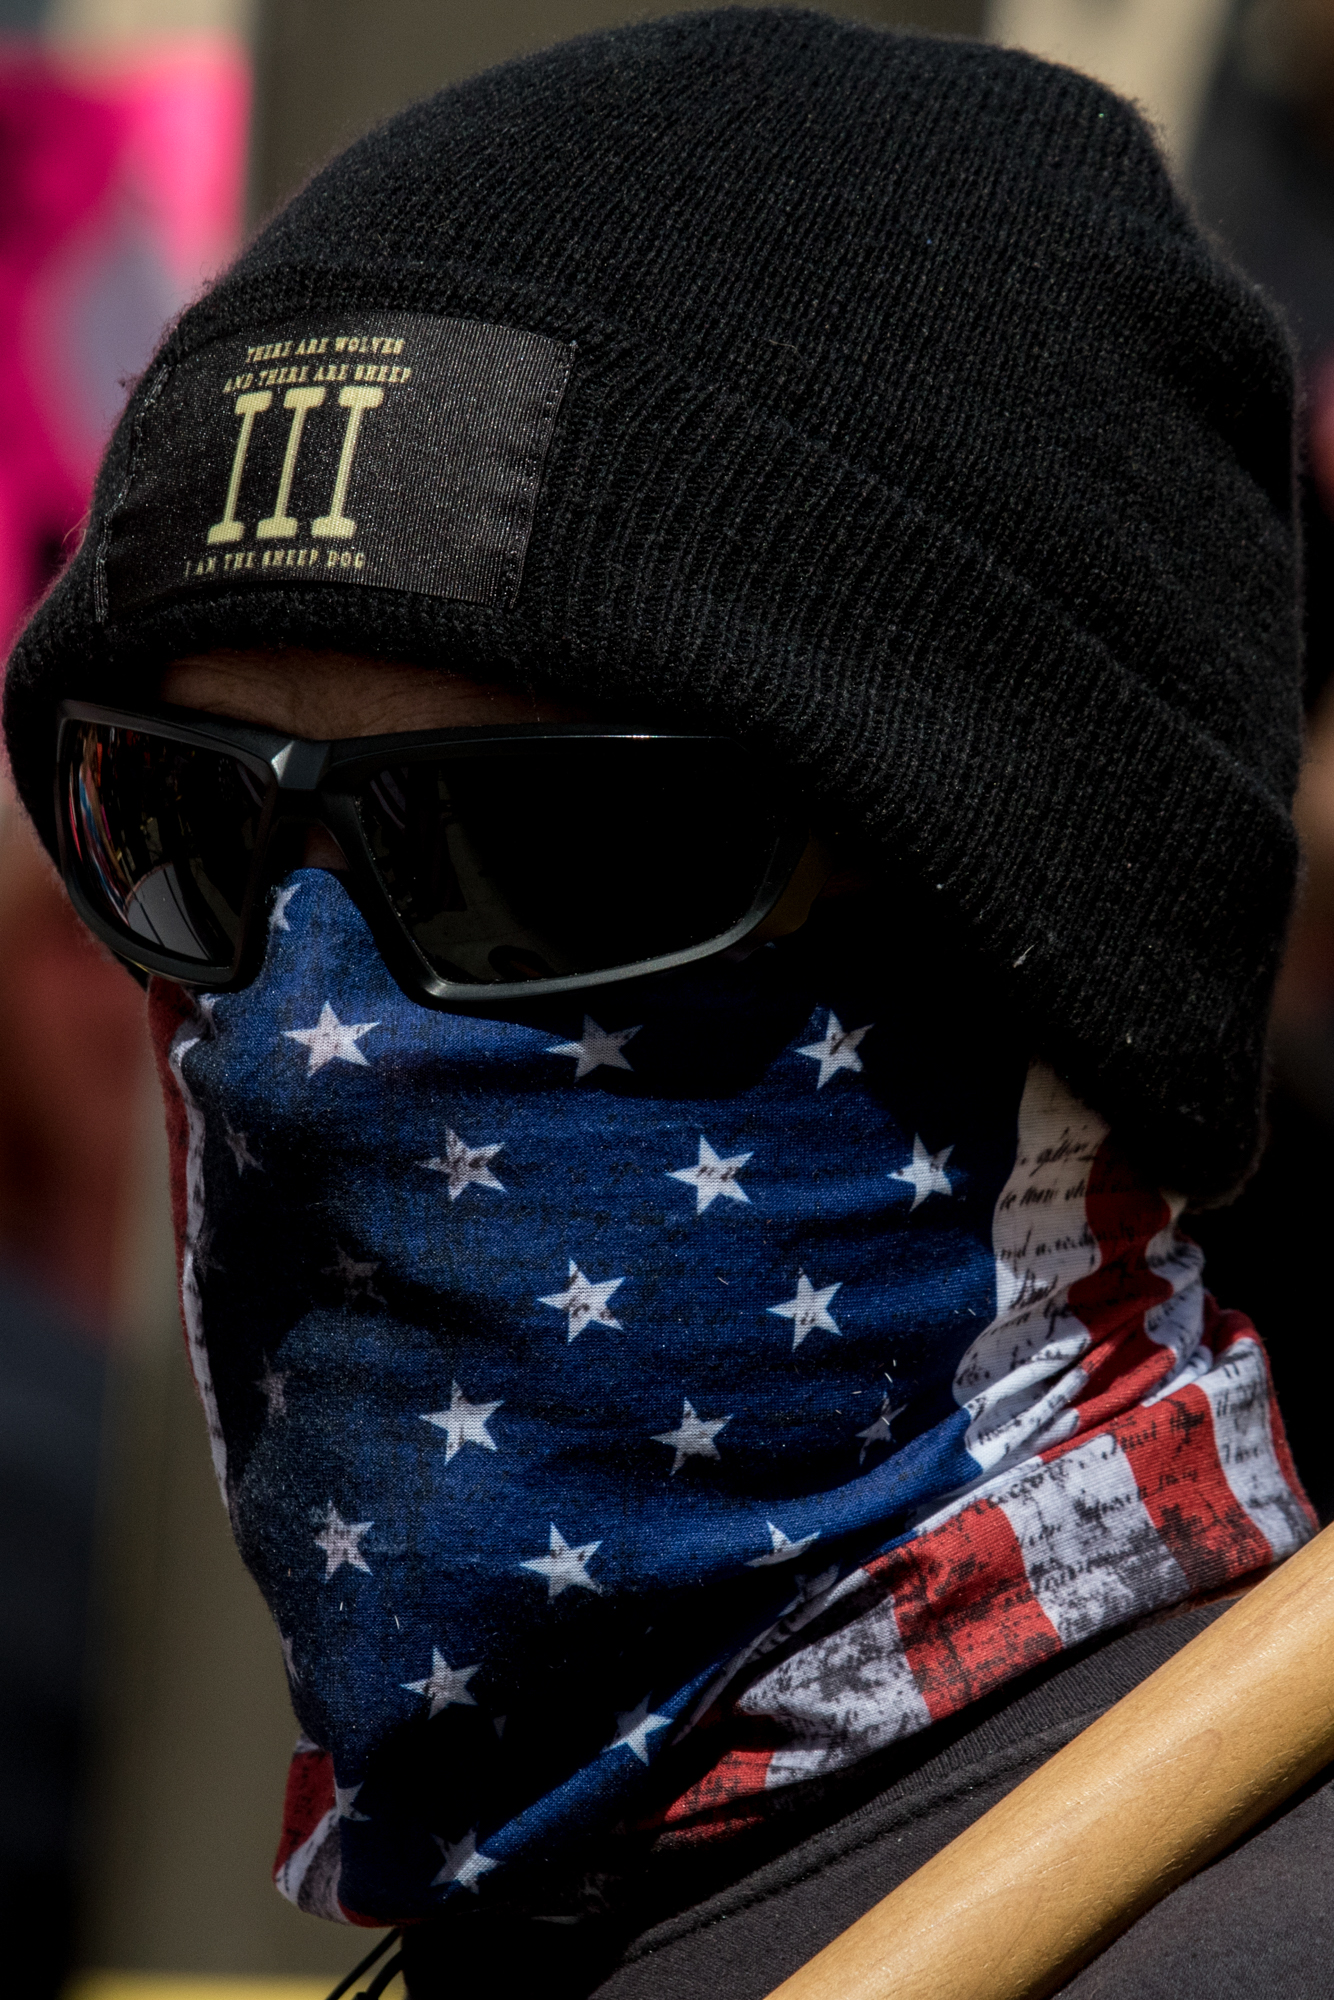  A masked Donald Trump supporter at the March For Our Lives protest on March 24, 2018 in Los Angeles, California. (Zane Meyer-Thornton/Corsair Photo) 